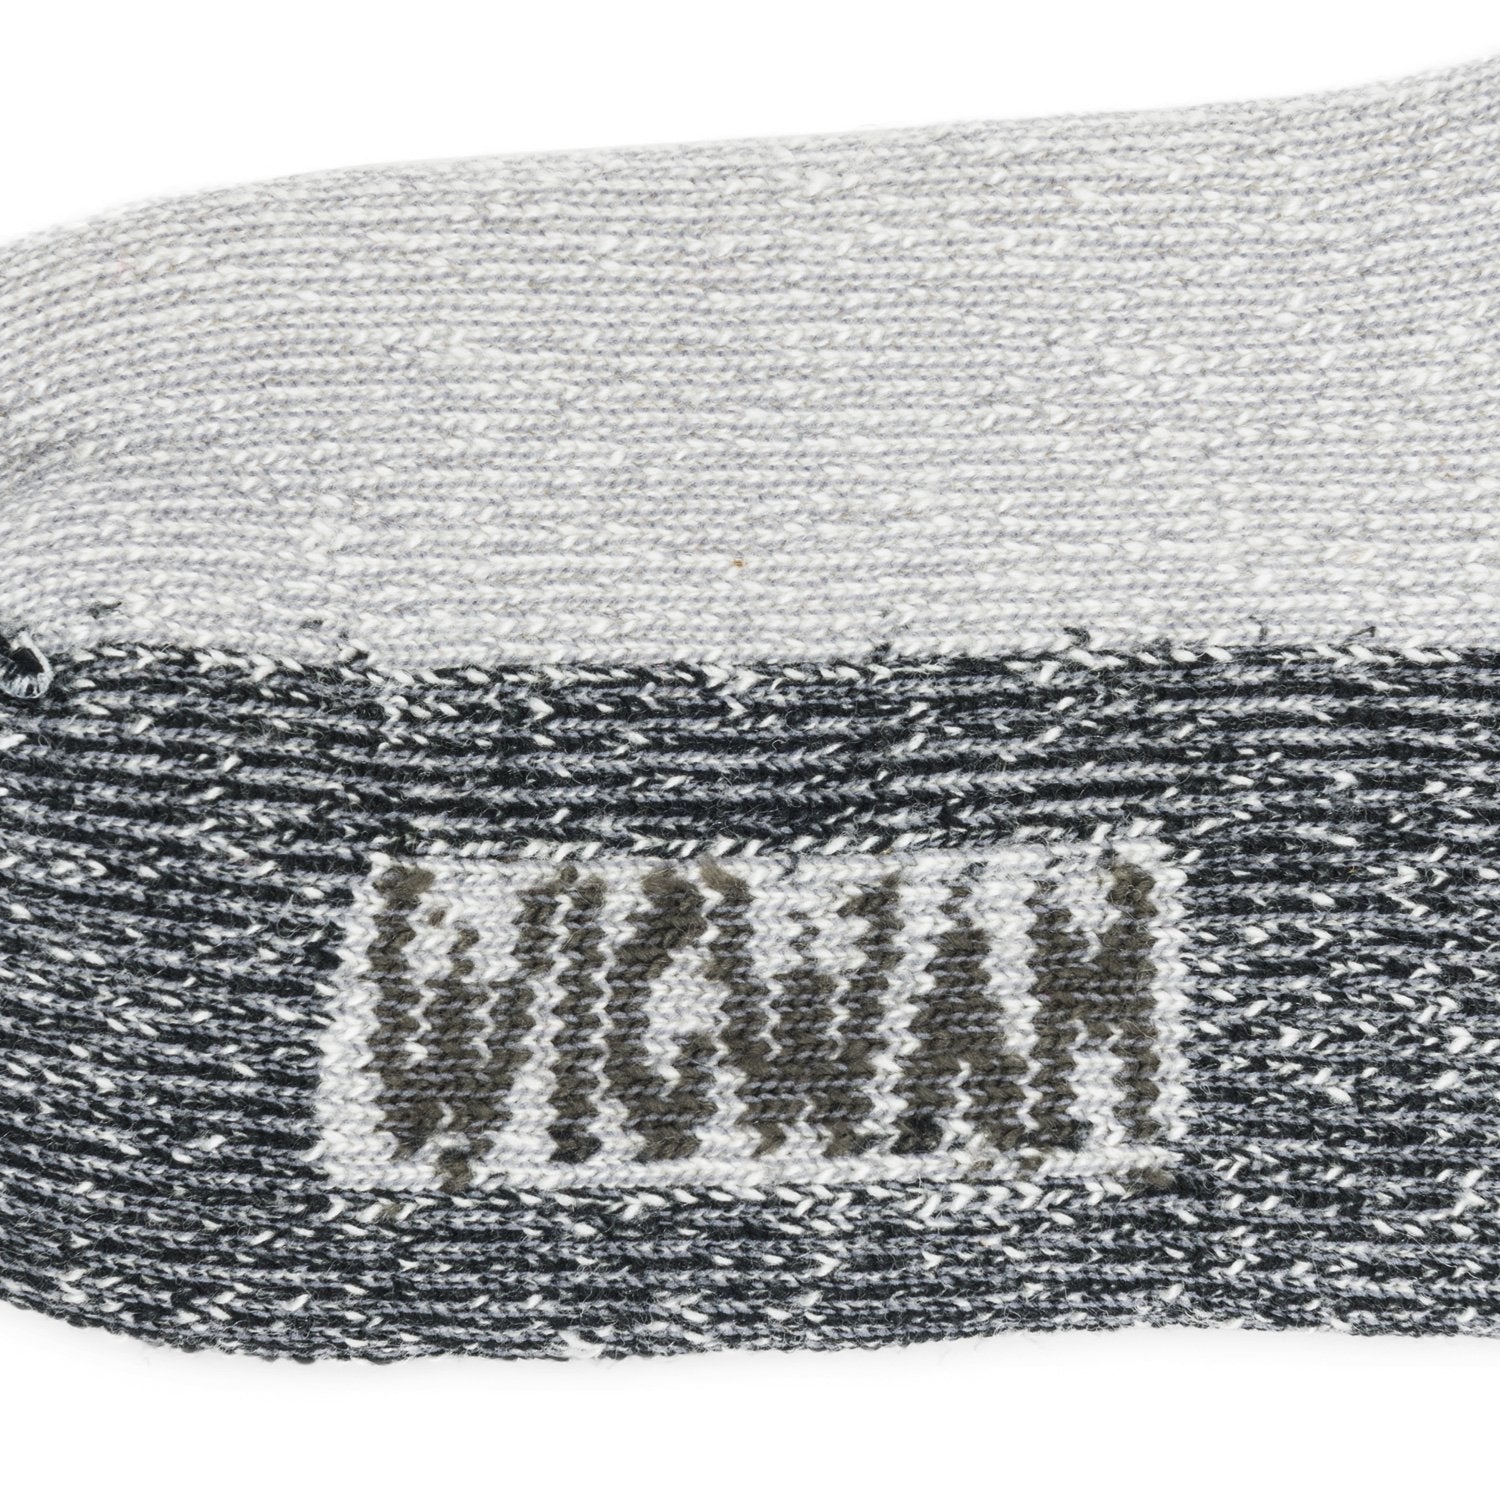 Diabetic Thermal Crew Heavyweight Sock With Wool - Grey/Black knit-in logo - made in The USA Wigwam Socks